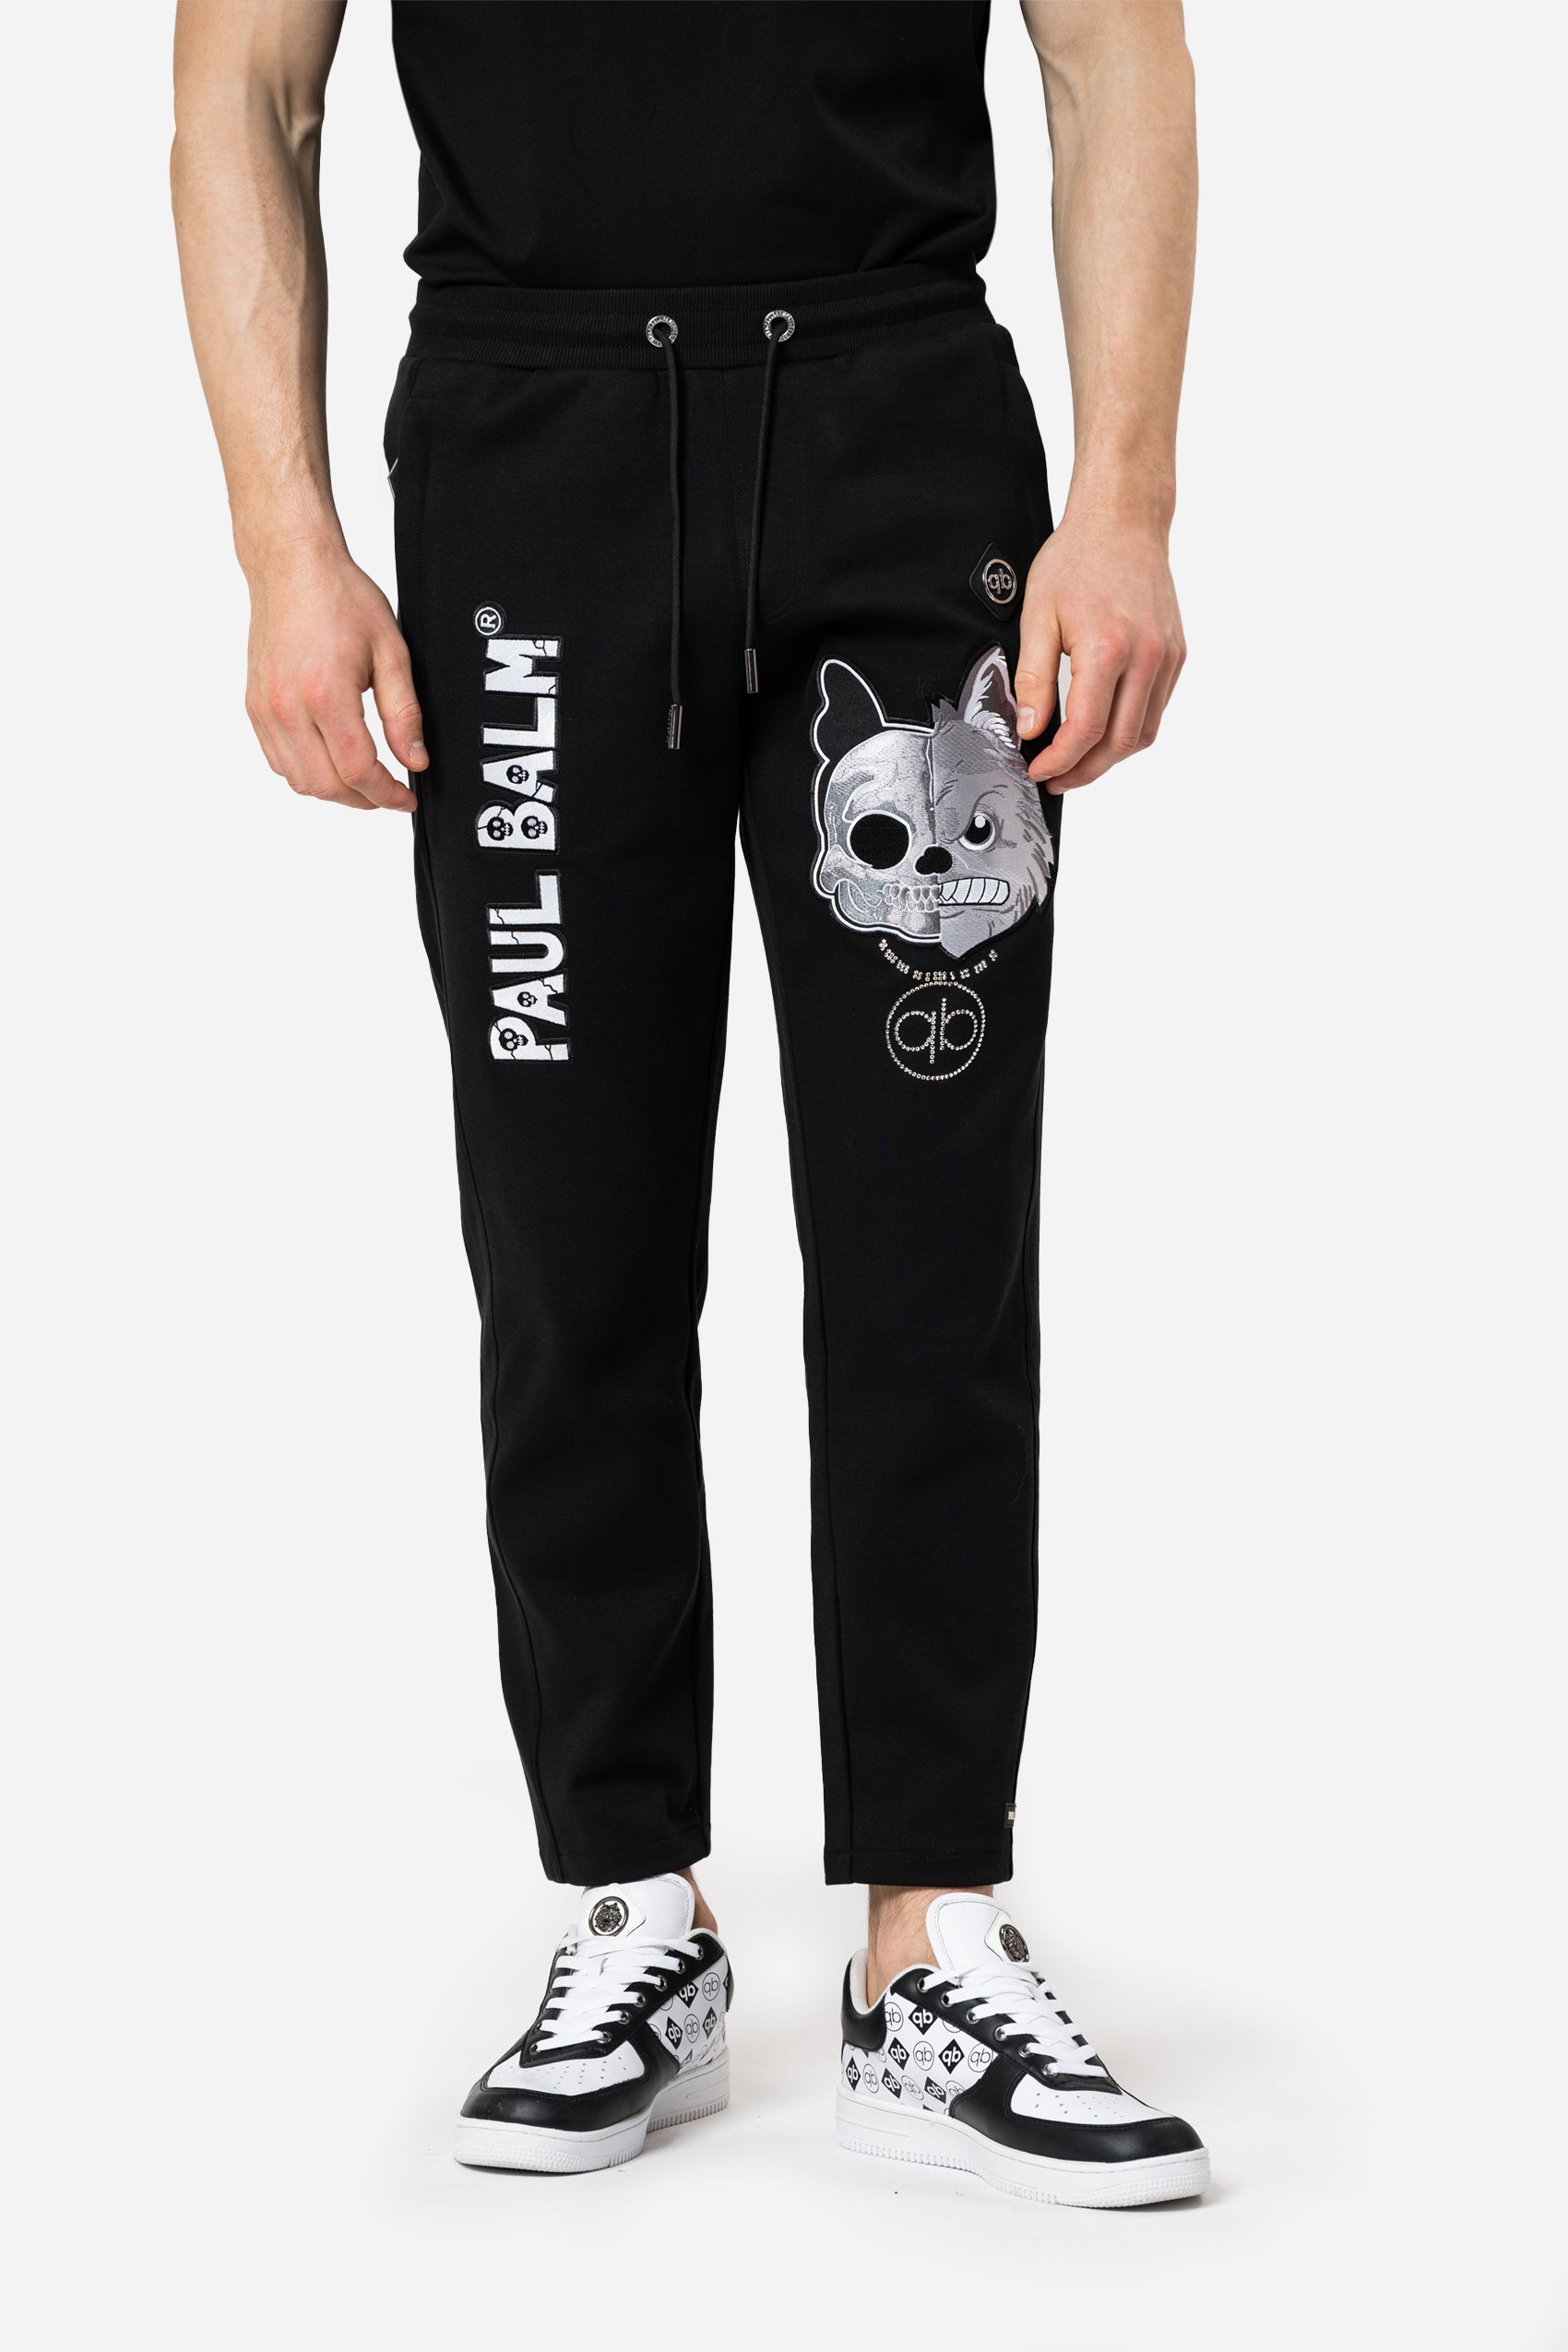 Embroidered Skull Pants - Limited to 300 - PAUL BALM WORLD